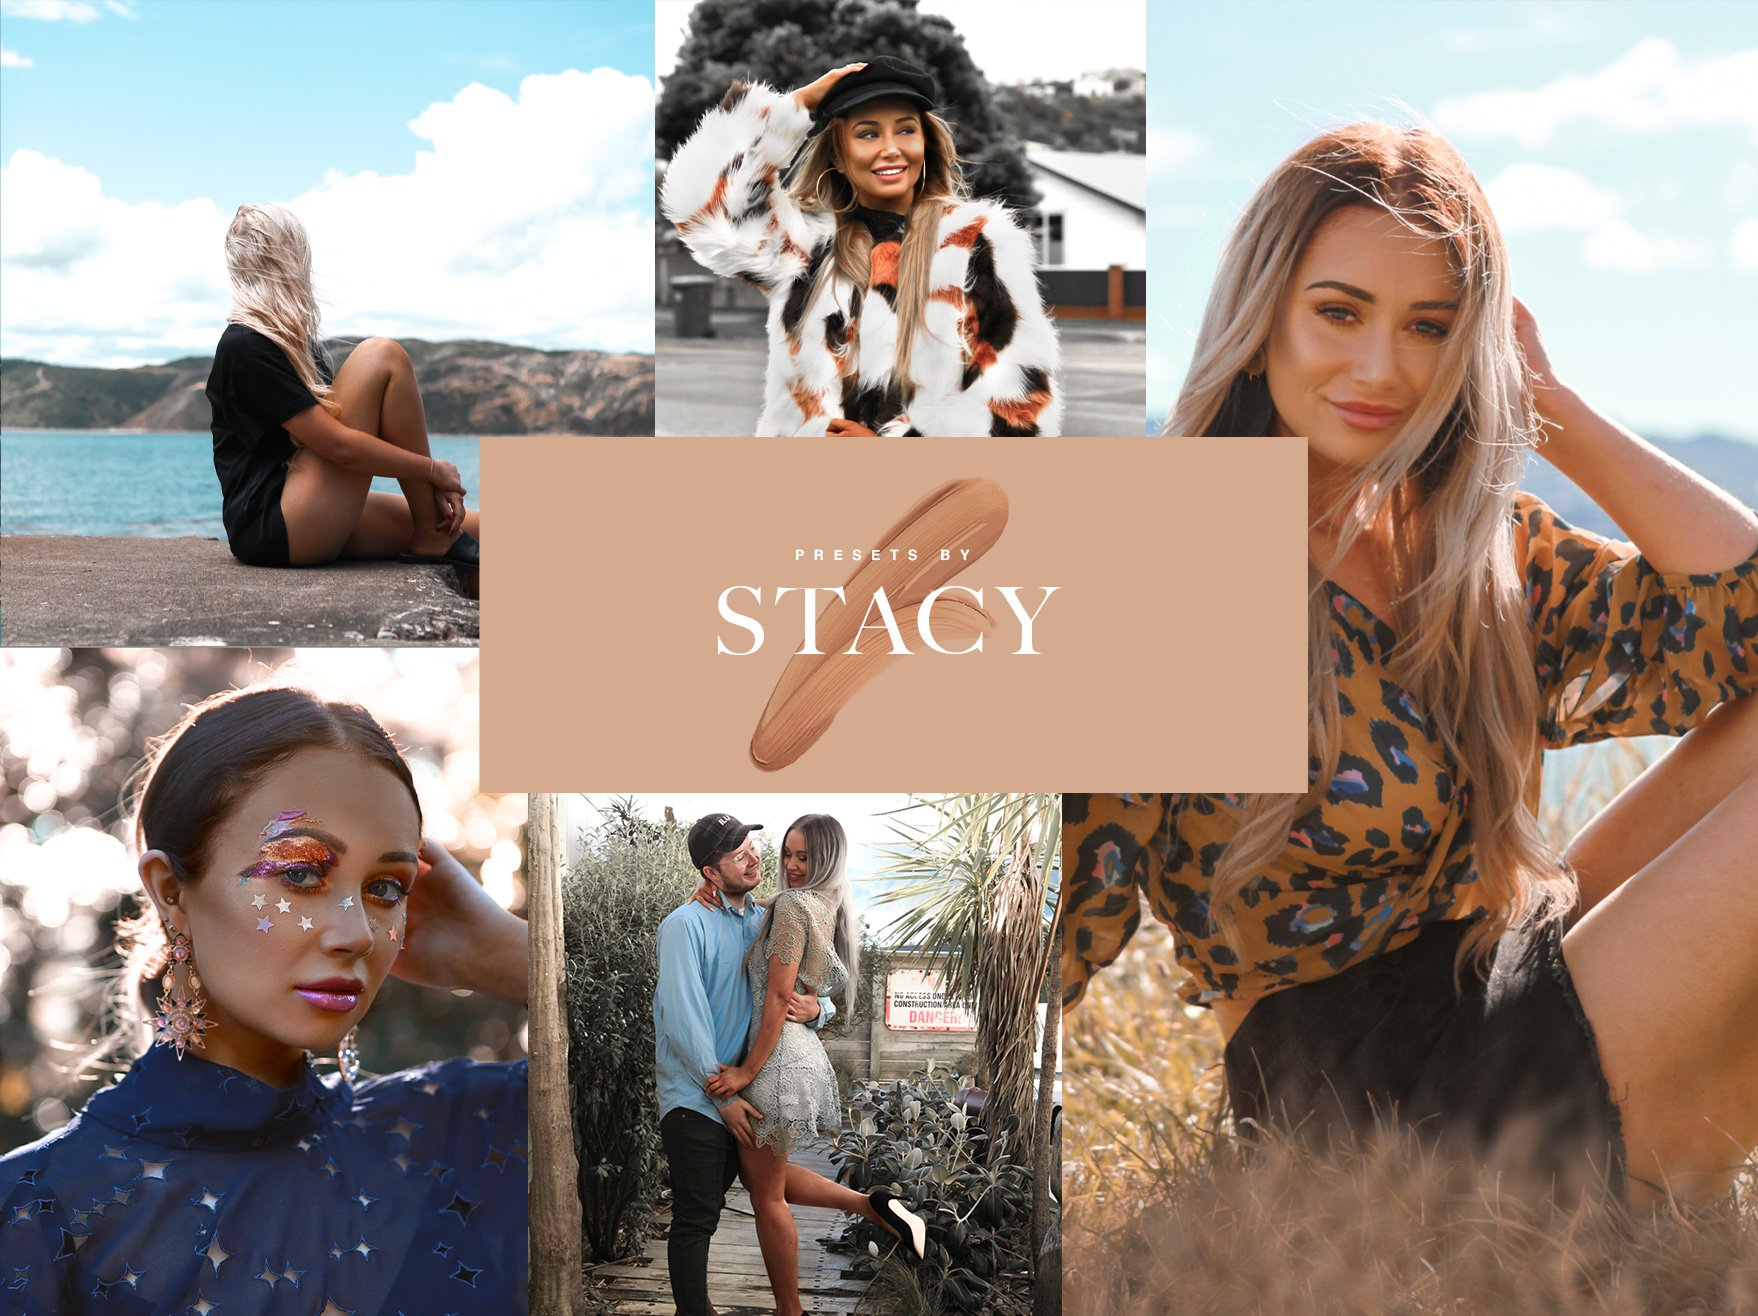 Presets by Stacy